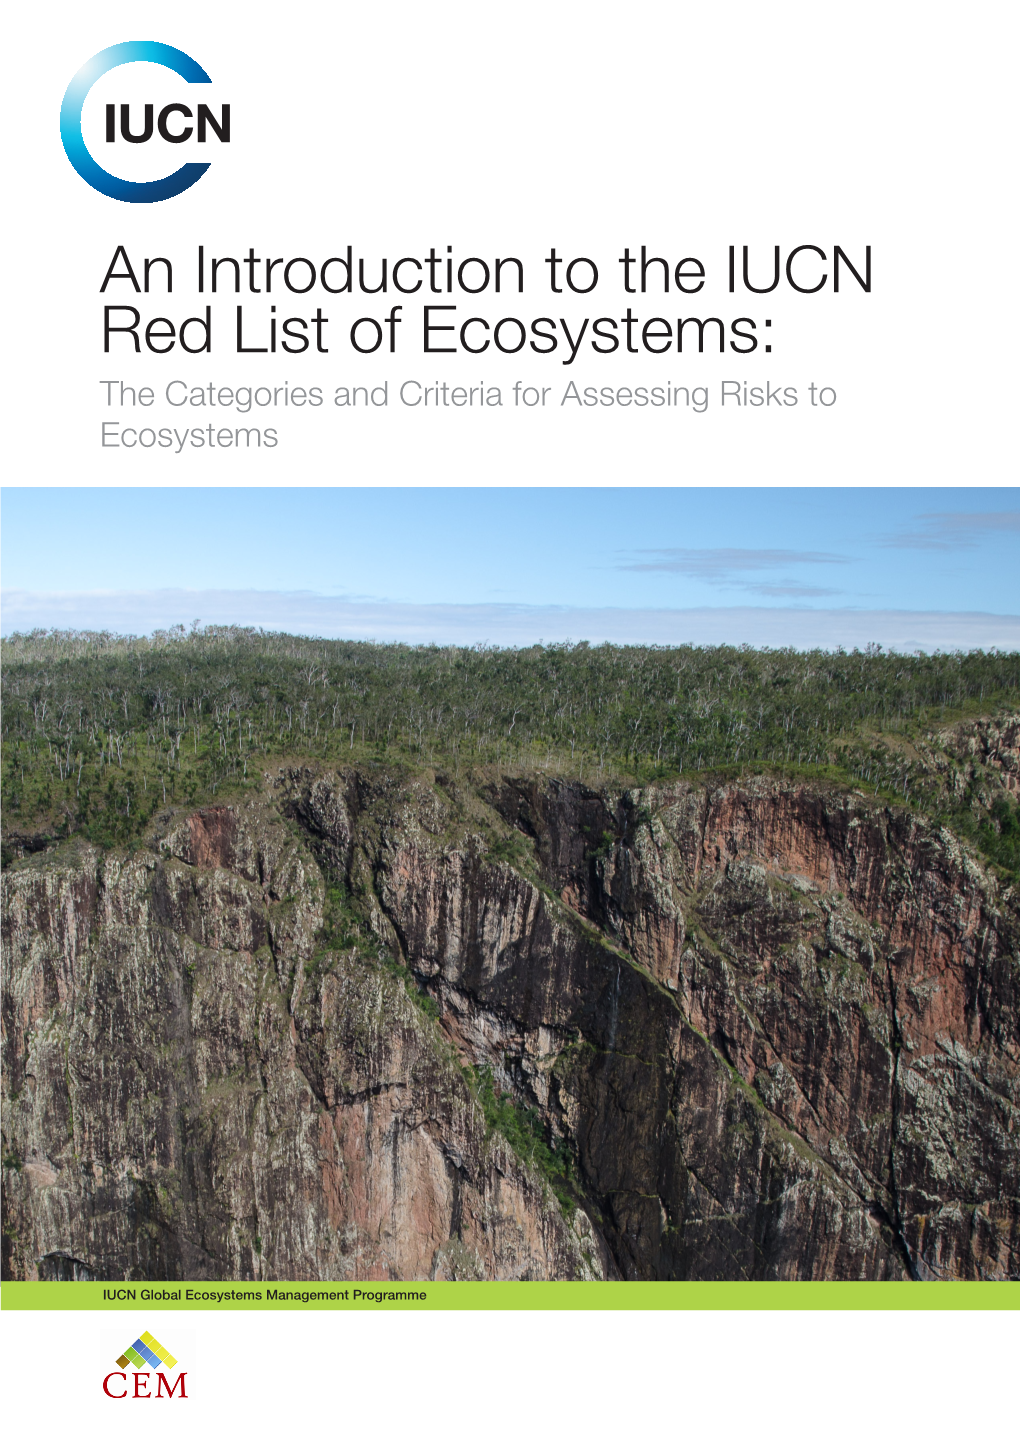 An Introduction to the IUCN Red List of Ecosystems: the Categories and Criteria for Assessing Risks to Ecosystems